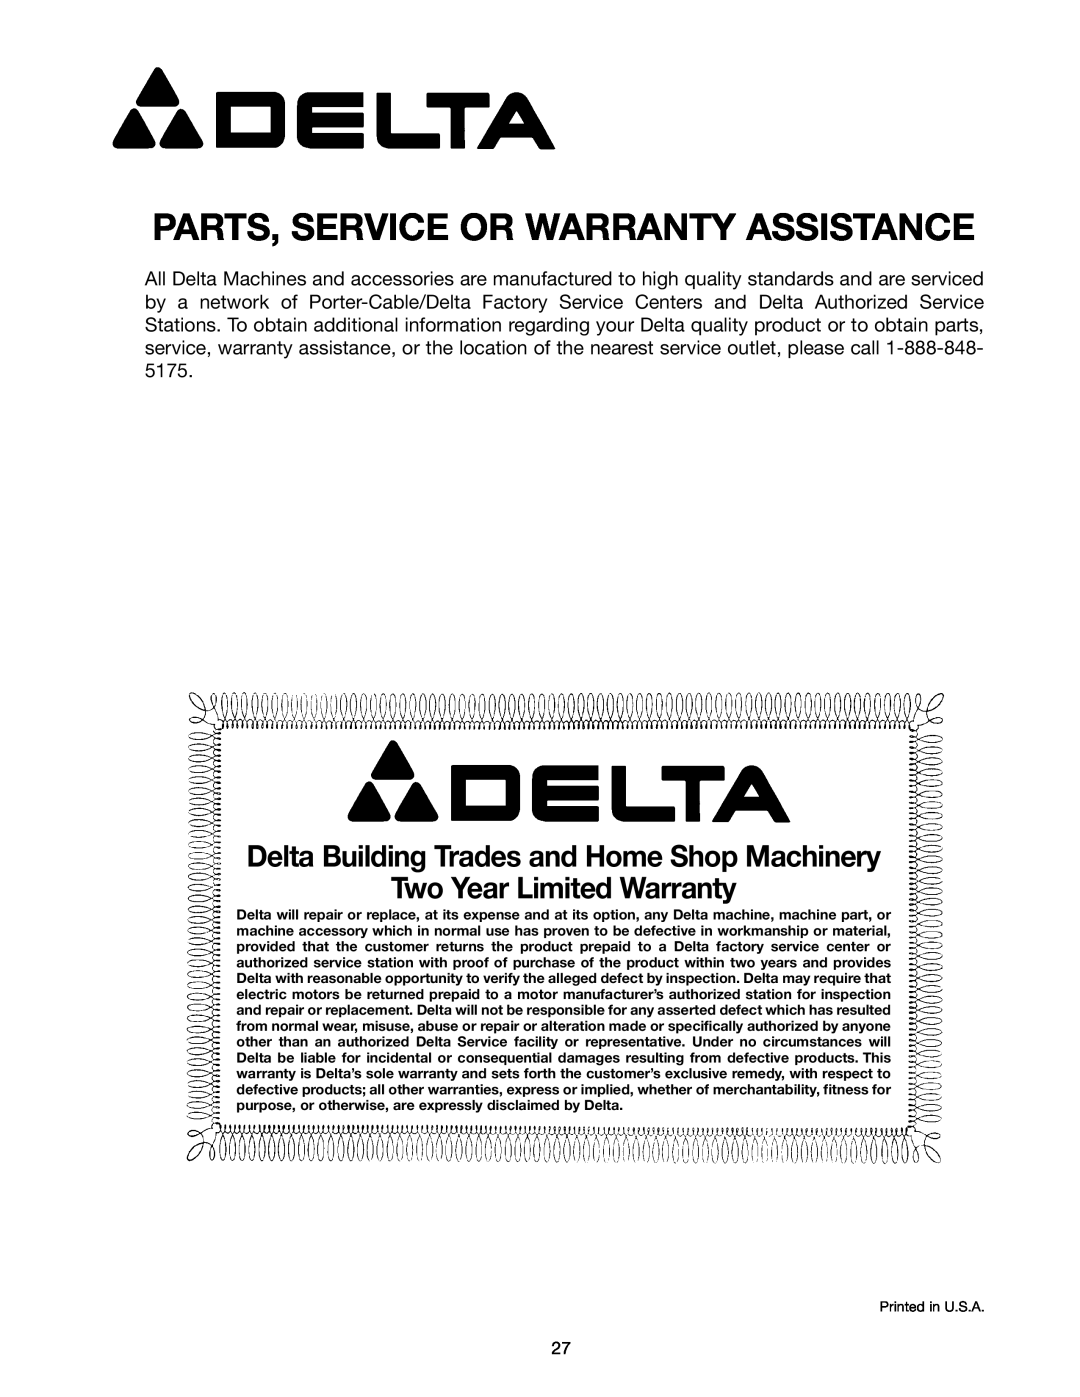 Delta 43-424 Parts, Service Or Warranty Assistance, Delta Building Trades and Home Shop Machinery, Printed in U.S.A 